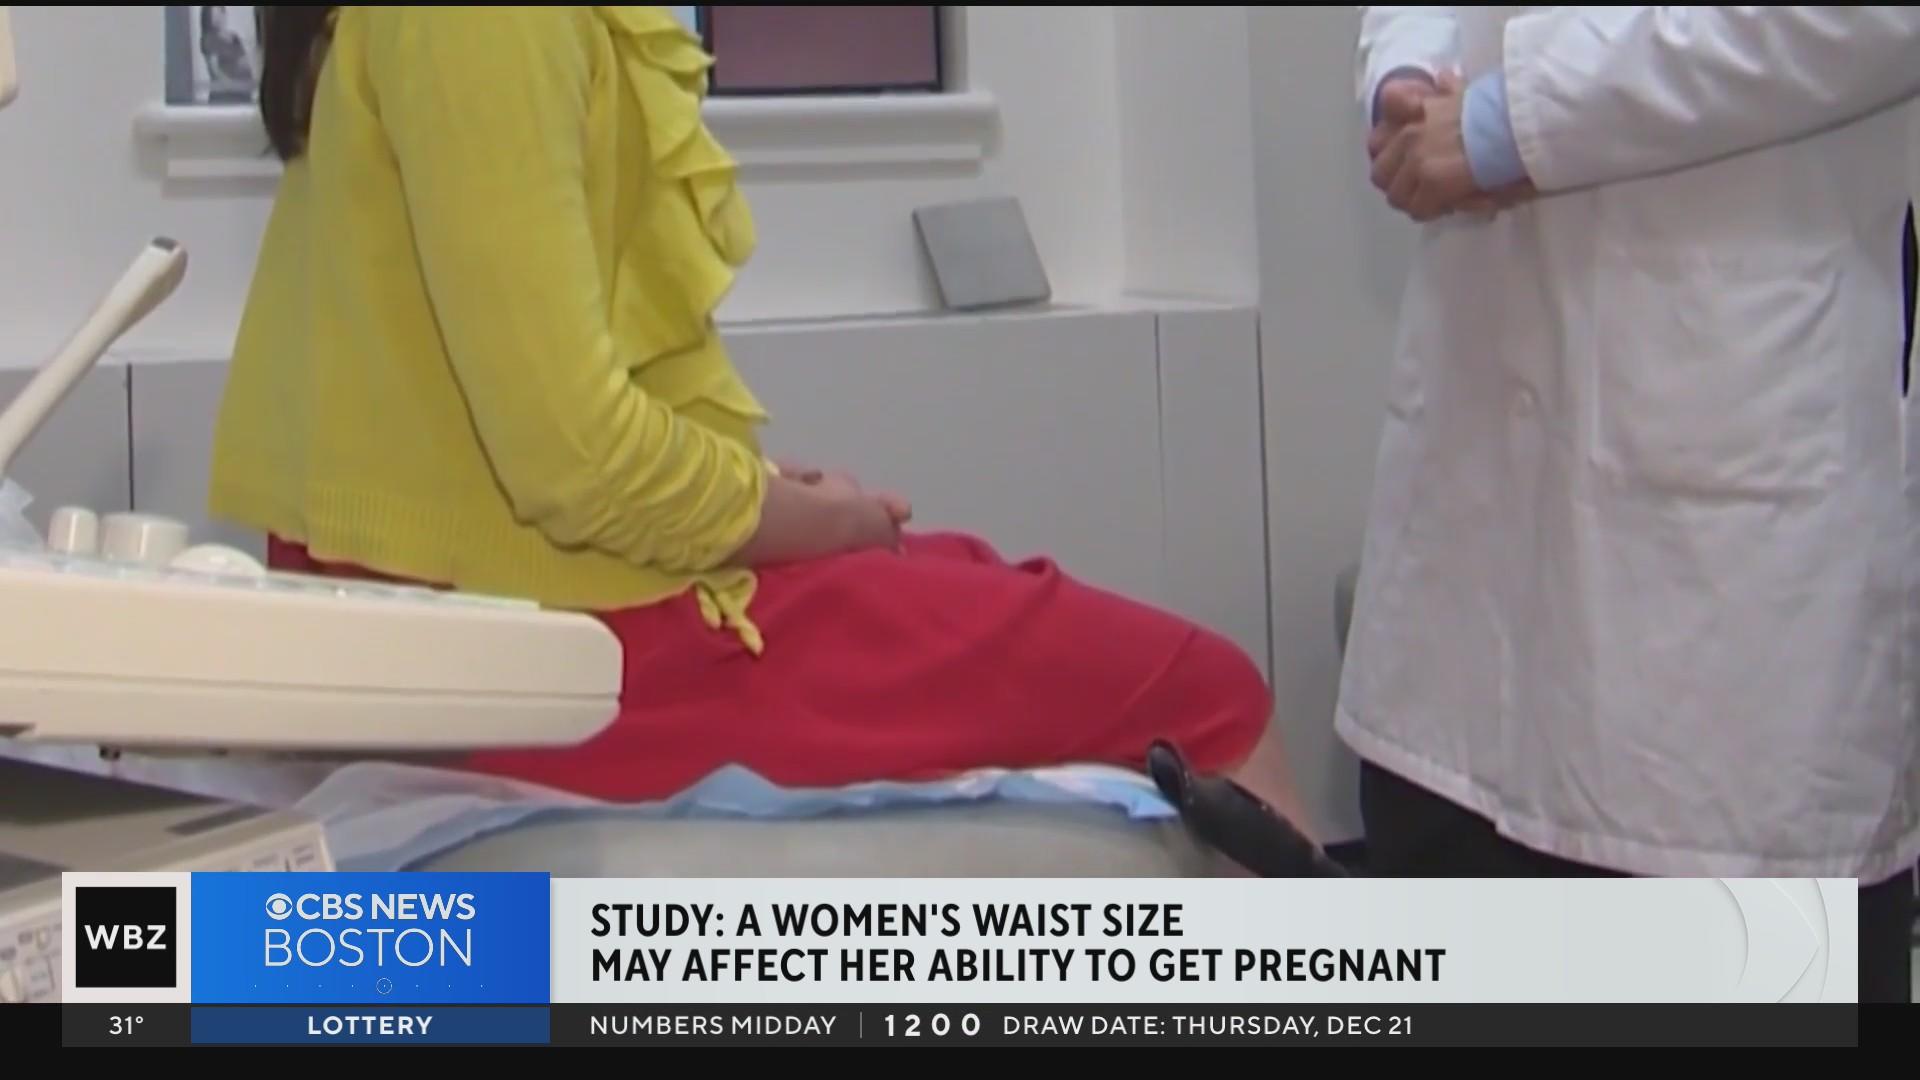 Woman's waist size may be contributing factor to infertility, study says